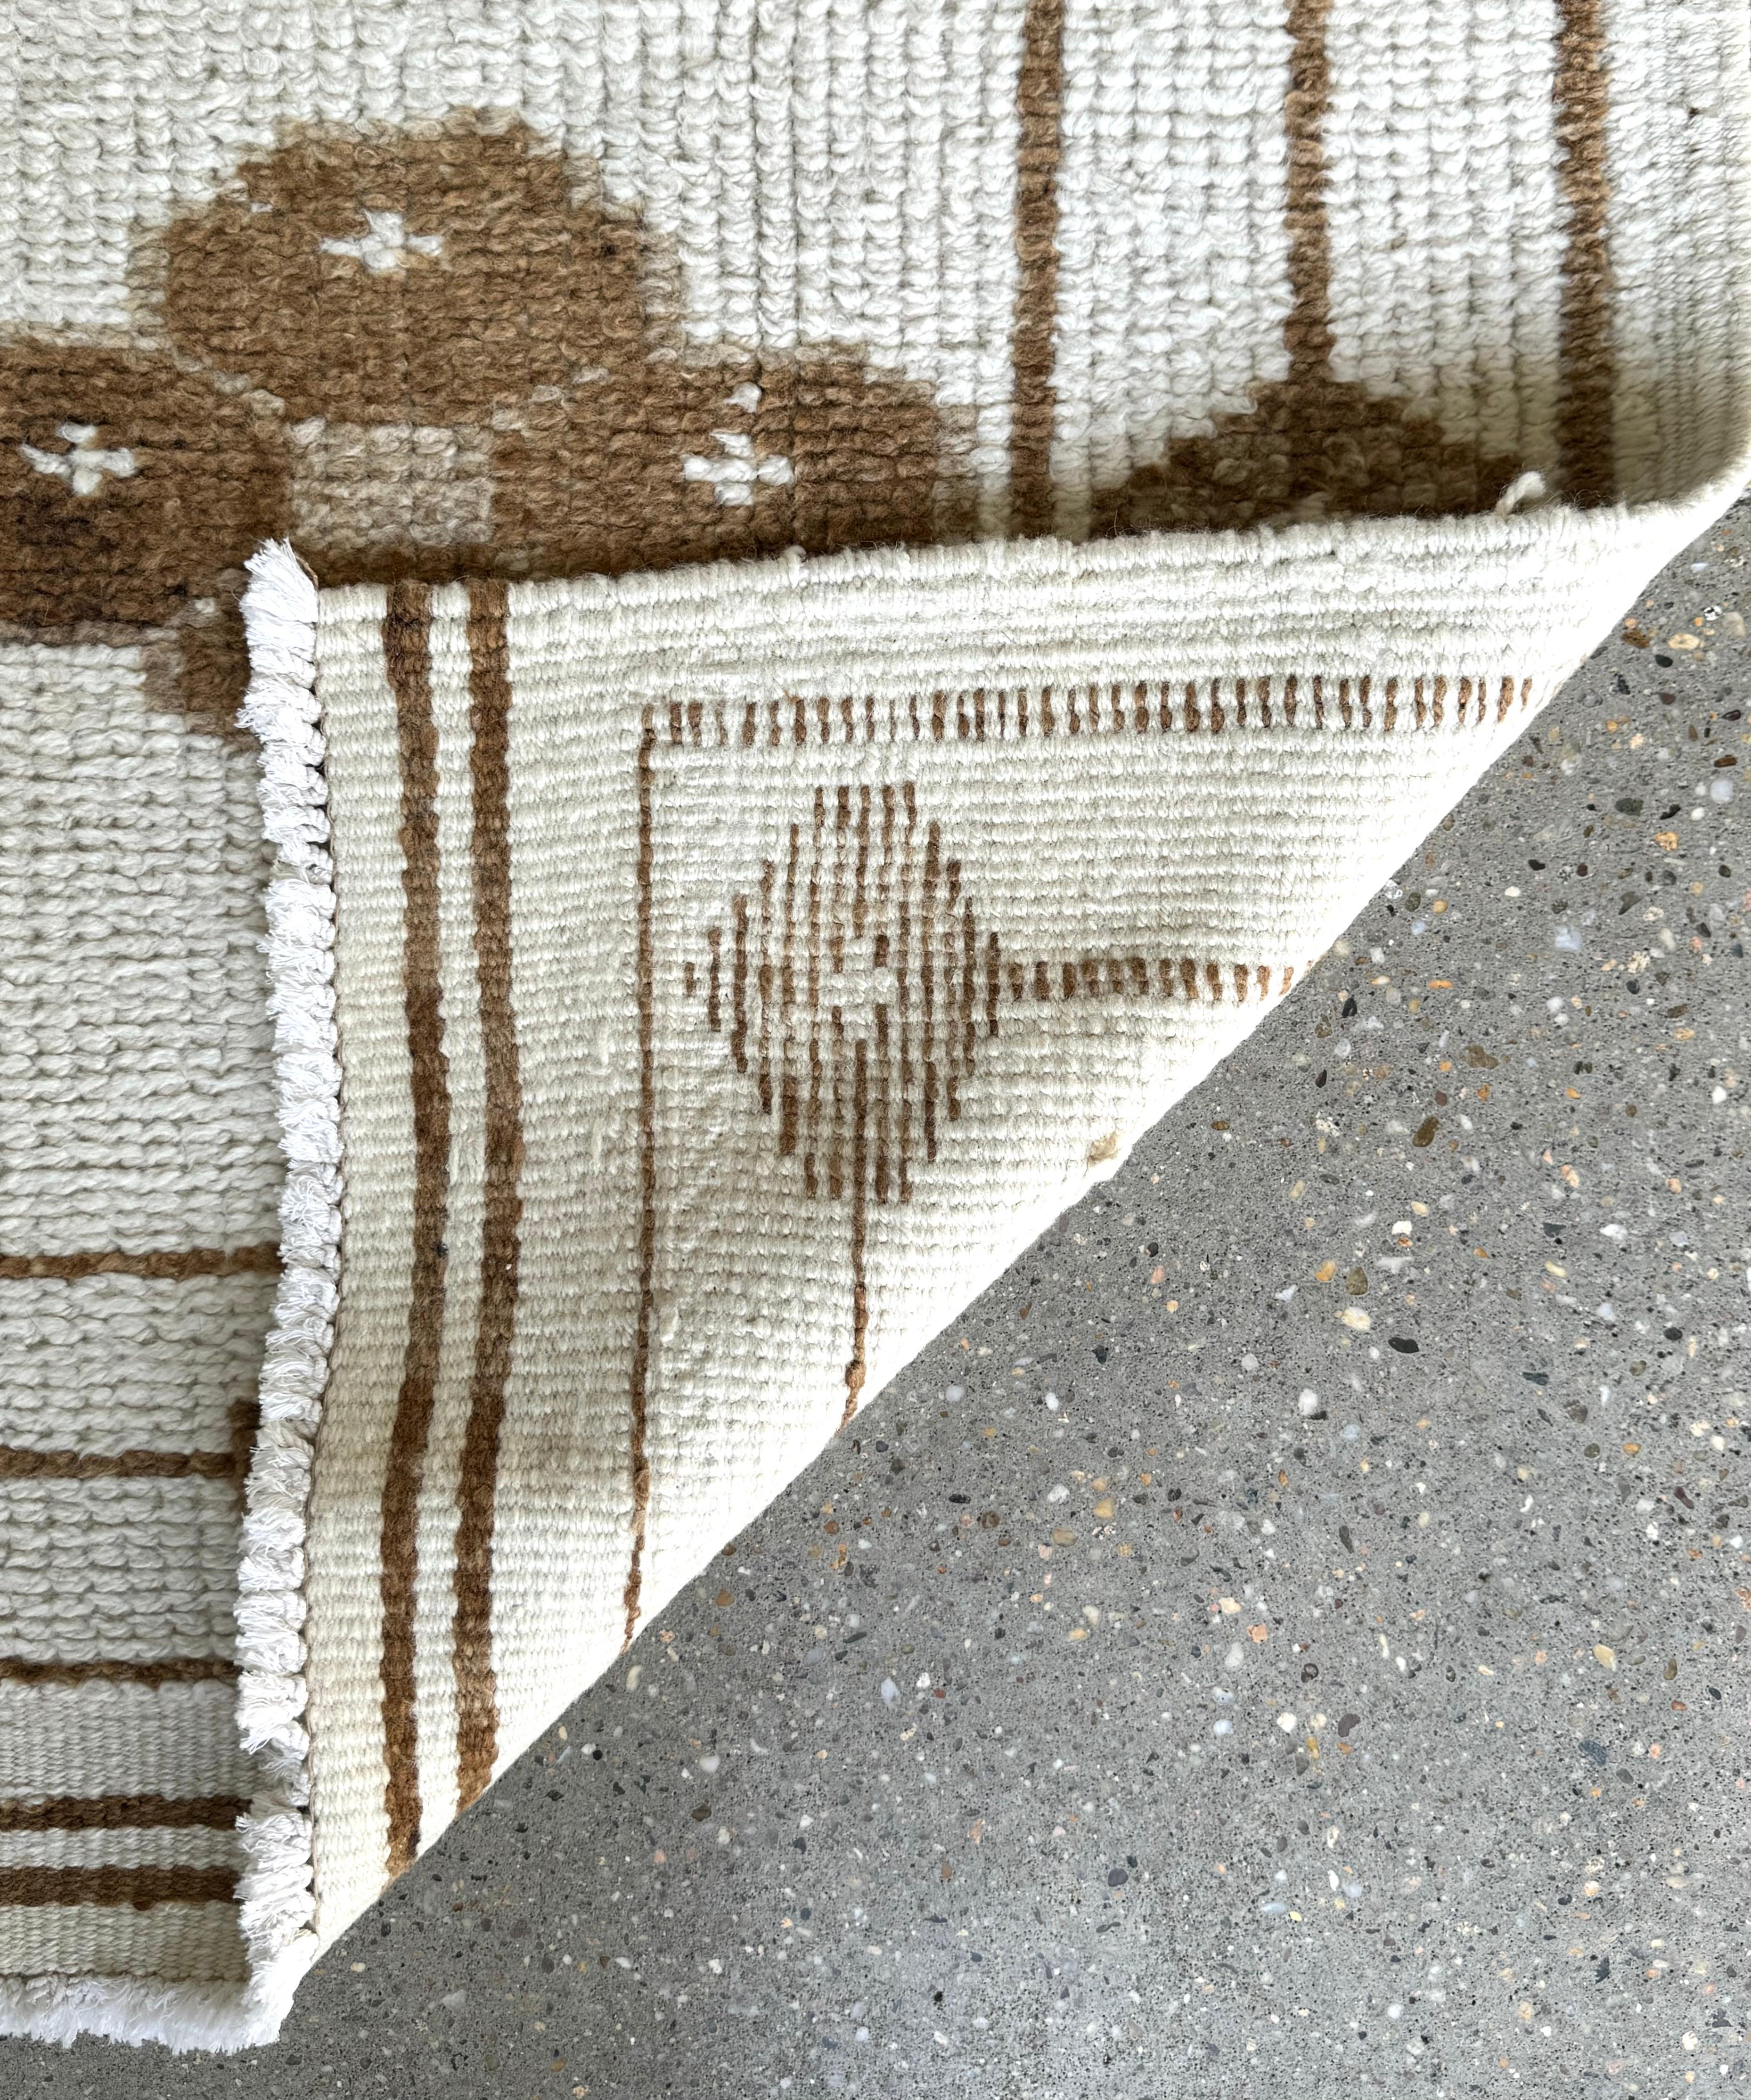 These runners, often woven by skilled artisans using techniques passed down through generations, showcase intricate hand-knotting with high-quality wool or sometimes silk. The meticulous knotting process results in durable yet finely detailed rugs